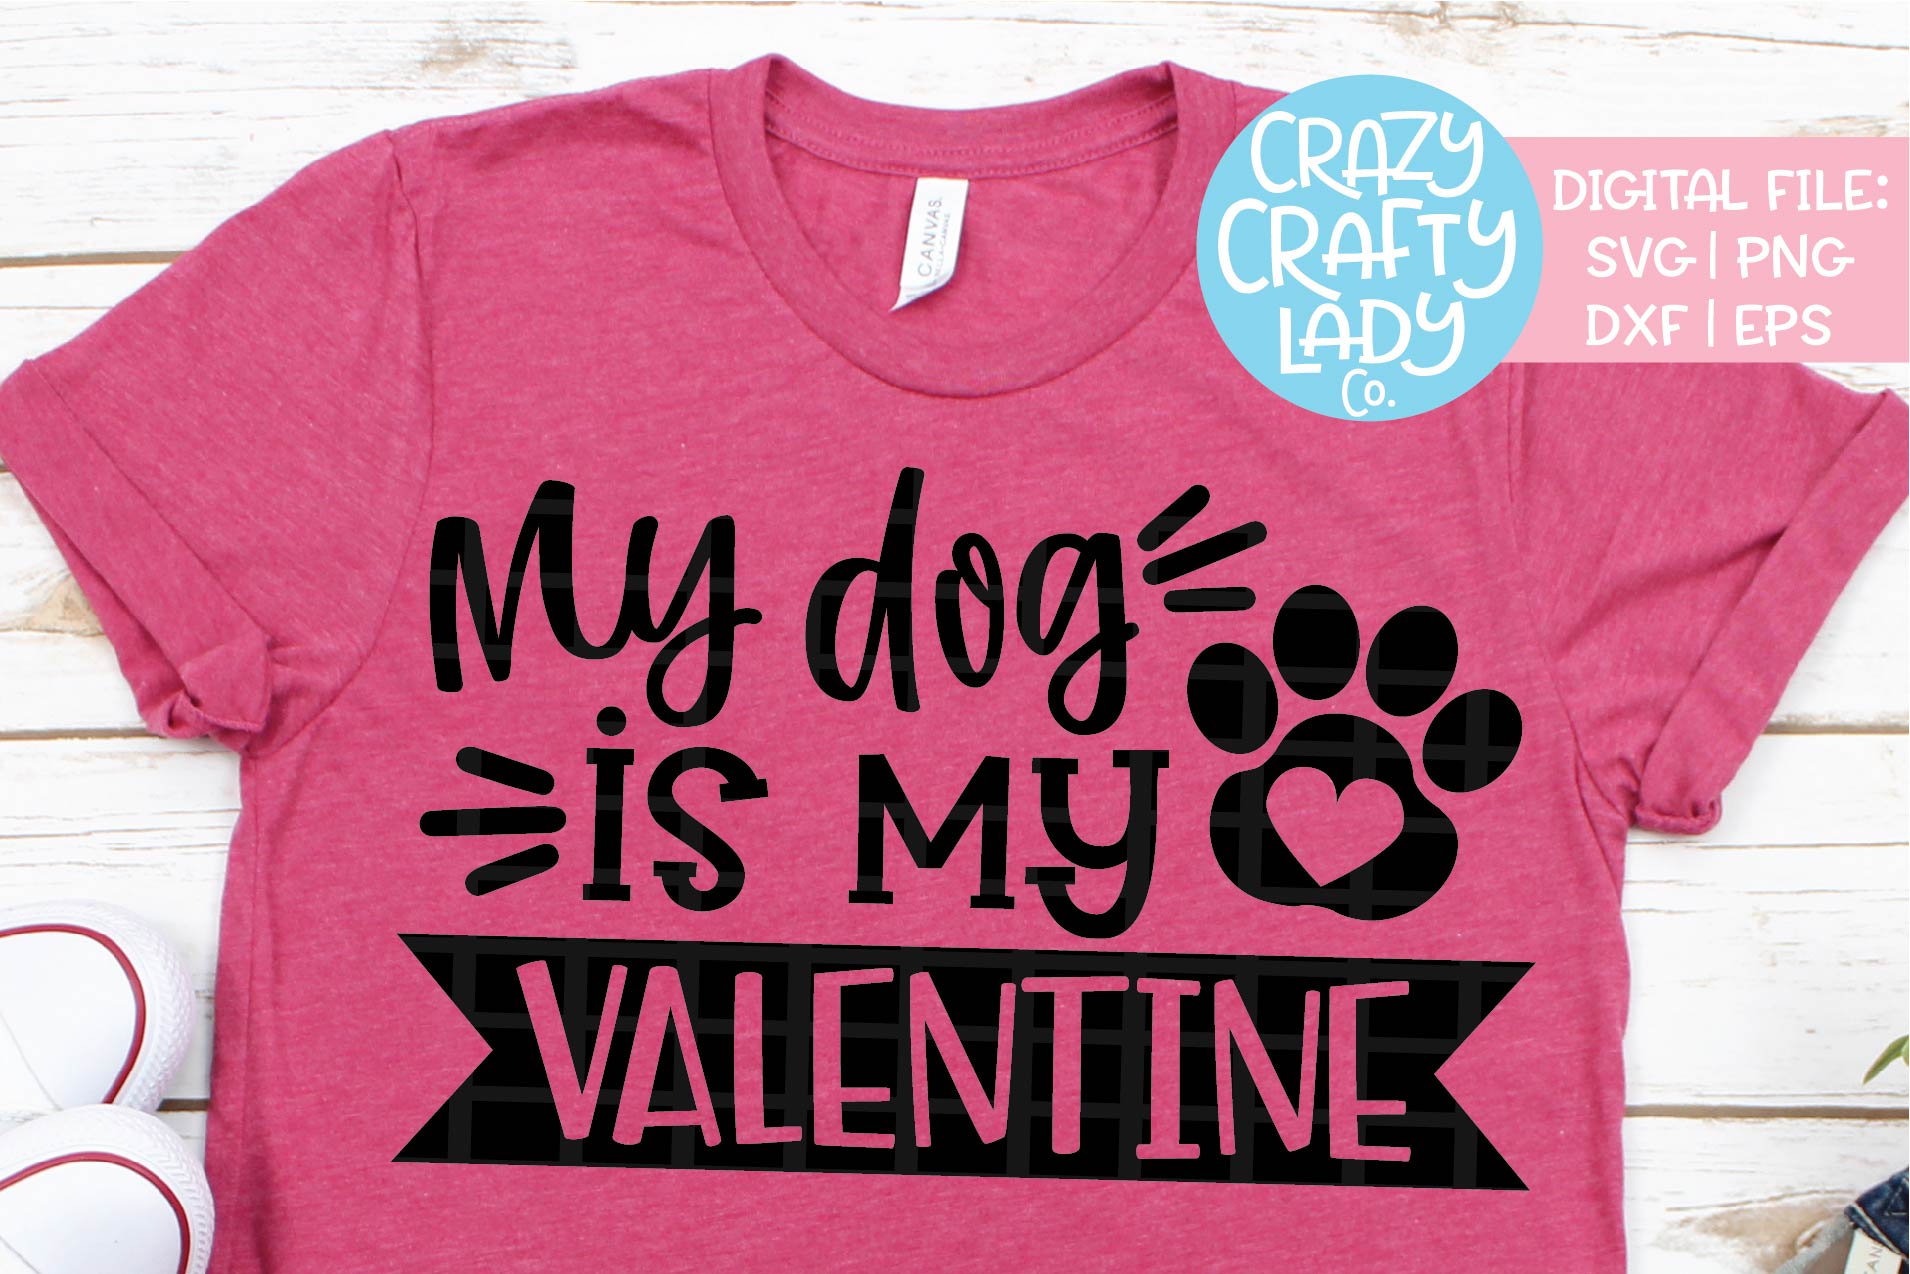 My Dog Is My Valentine SVG DXF EPS PNG Cut File